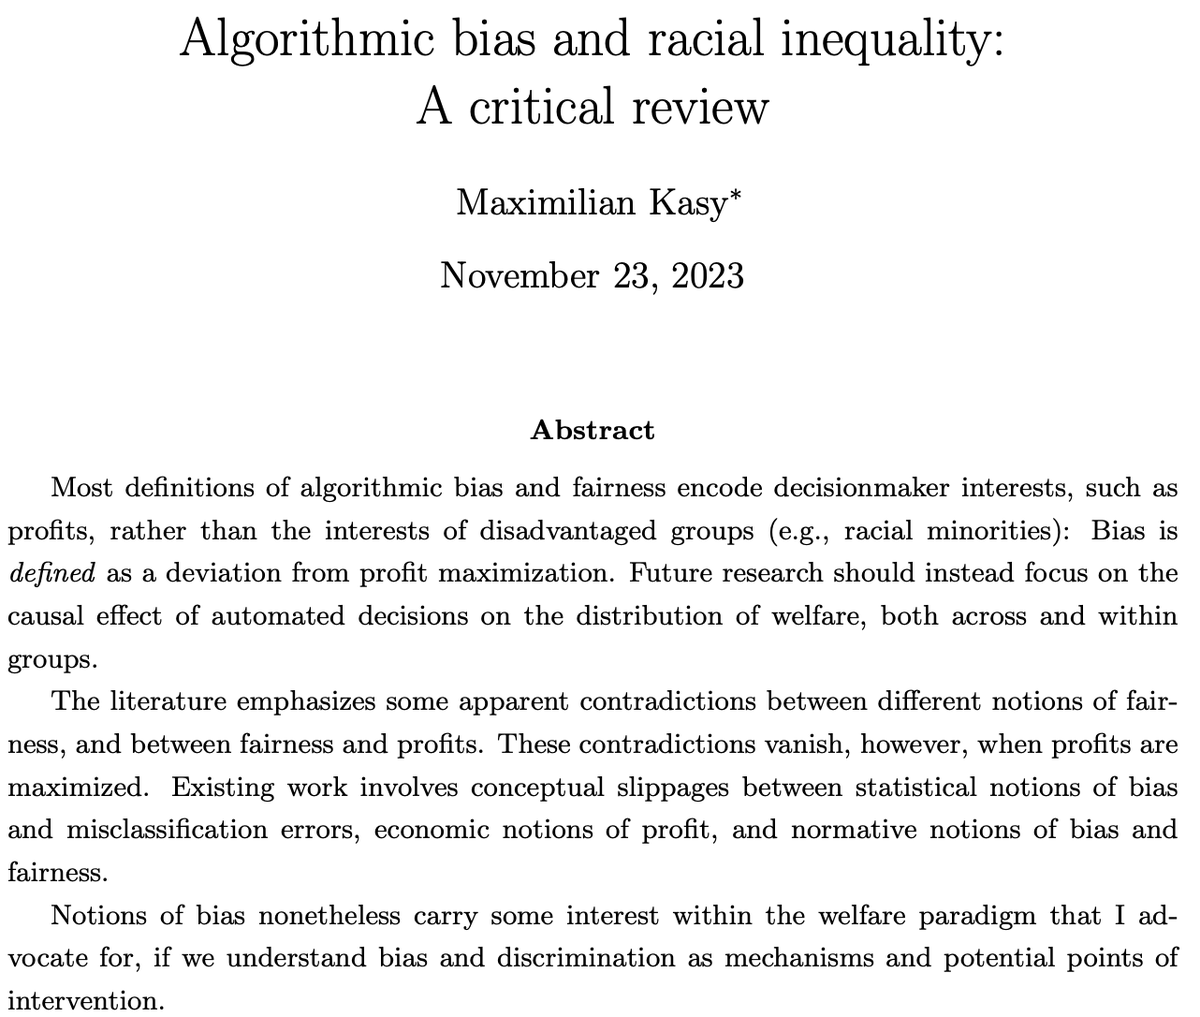 ✊🏾New draft just posted✊🏼
'Algorithmic bias and racial inequality: A critical review'
maxkasy.github.io/home/files/pap…

#fairness #algorithmicbias #inequality #racism